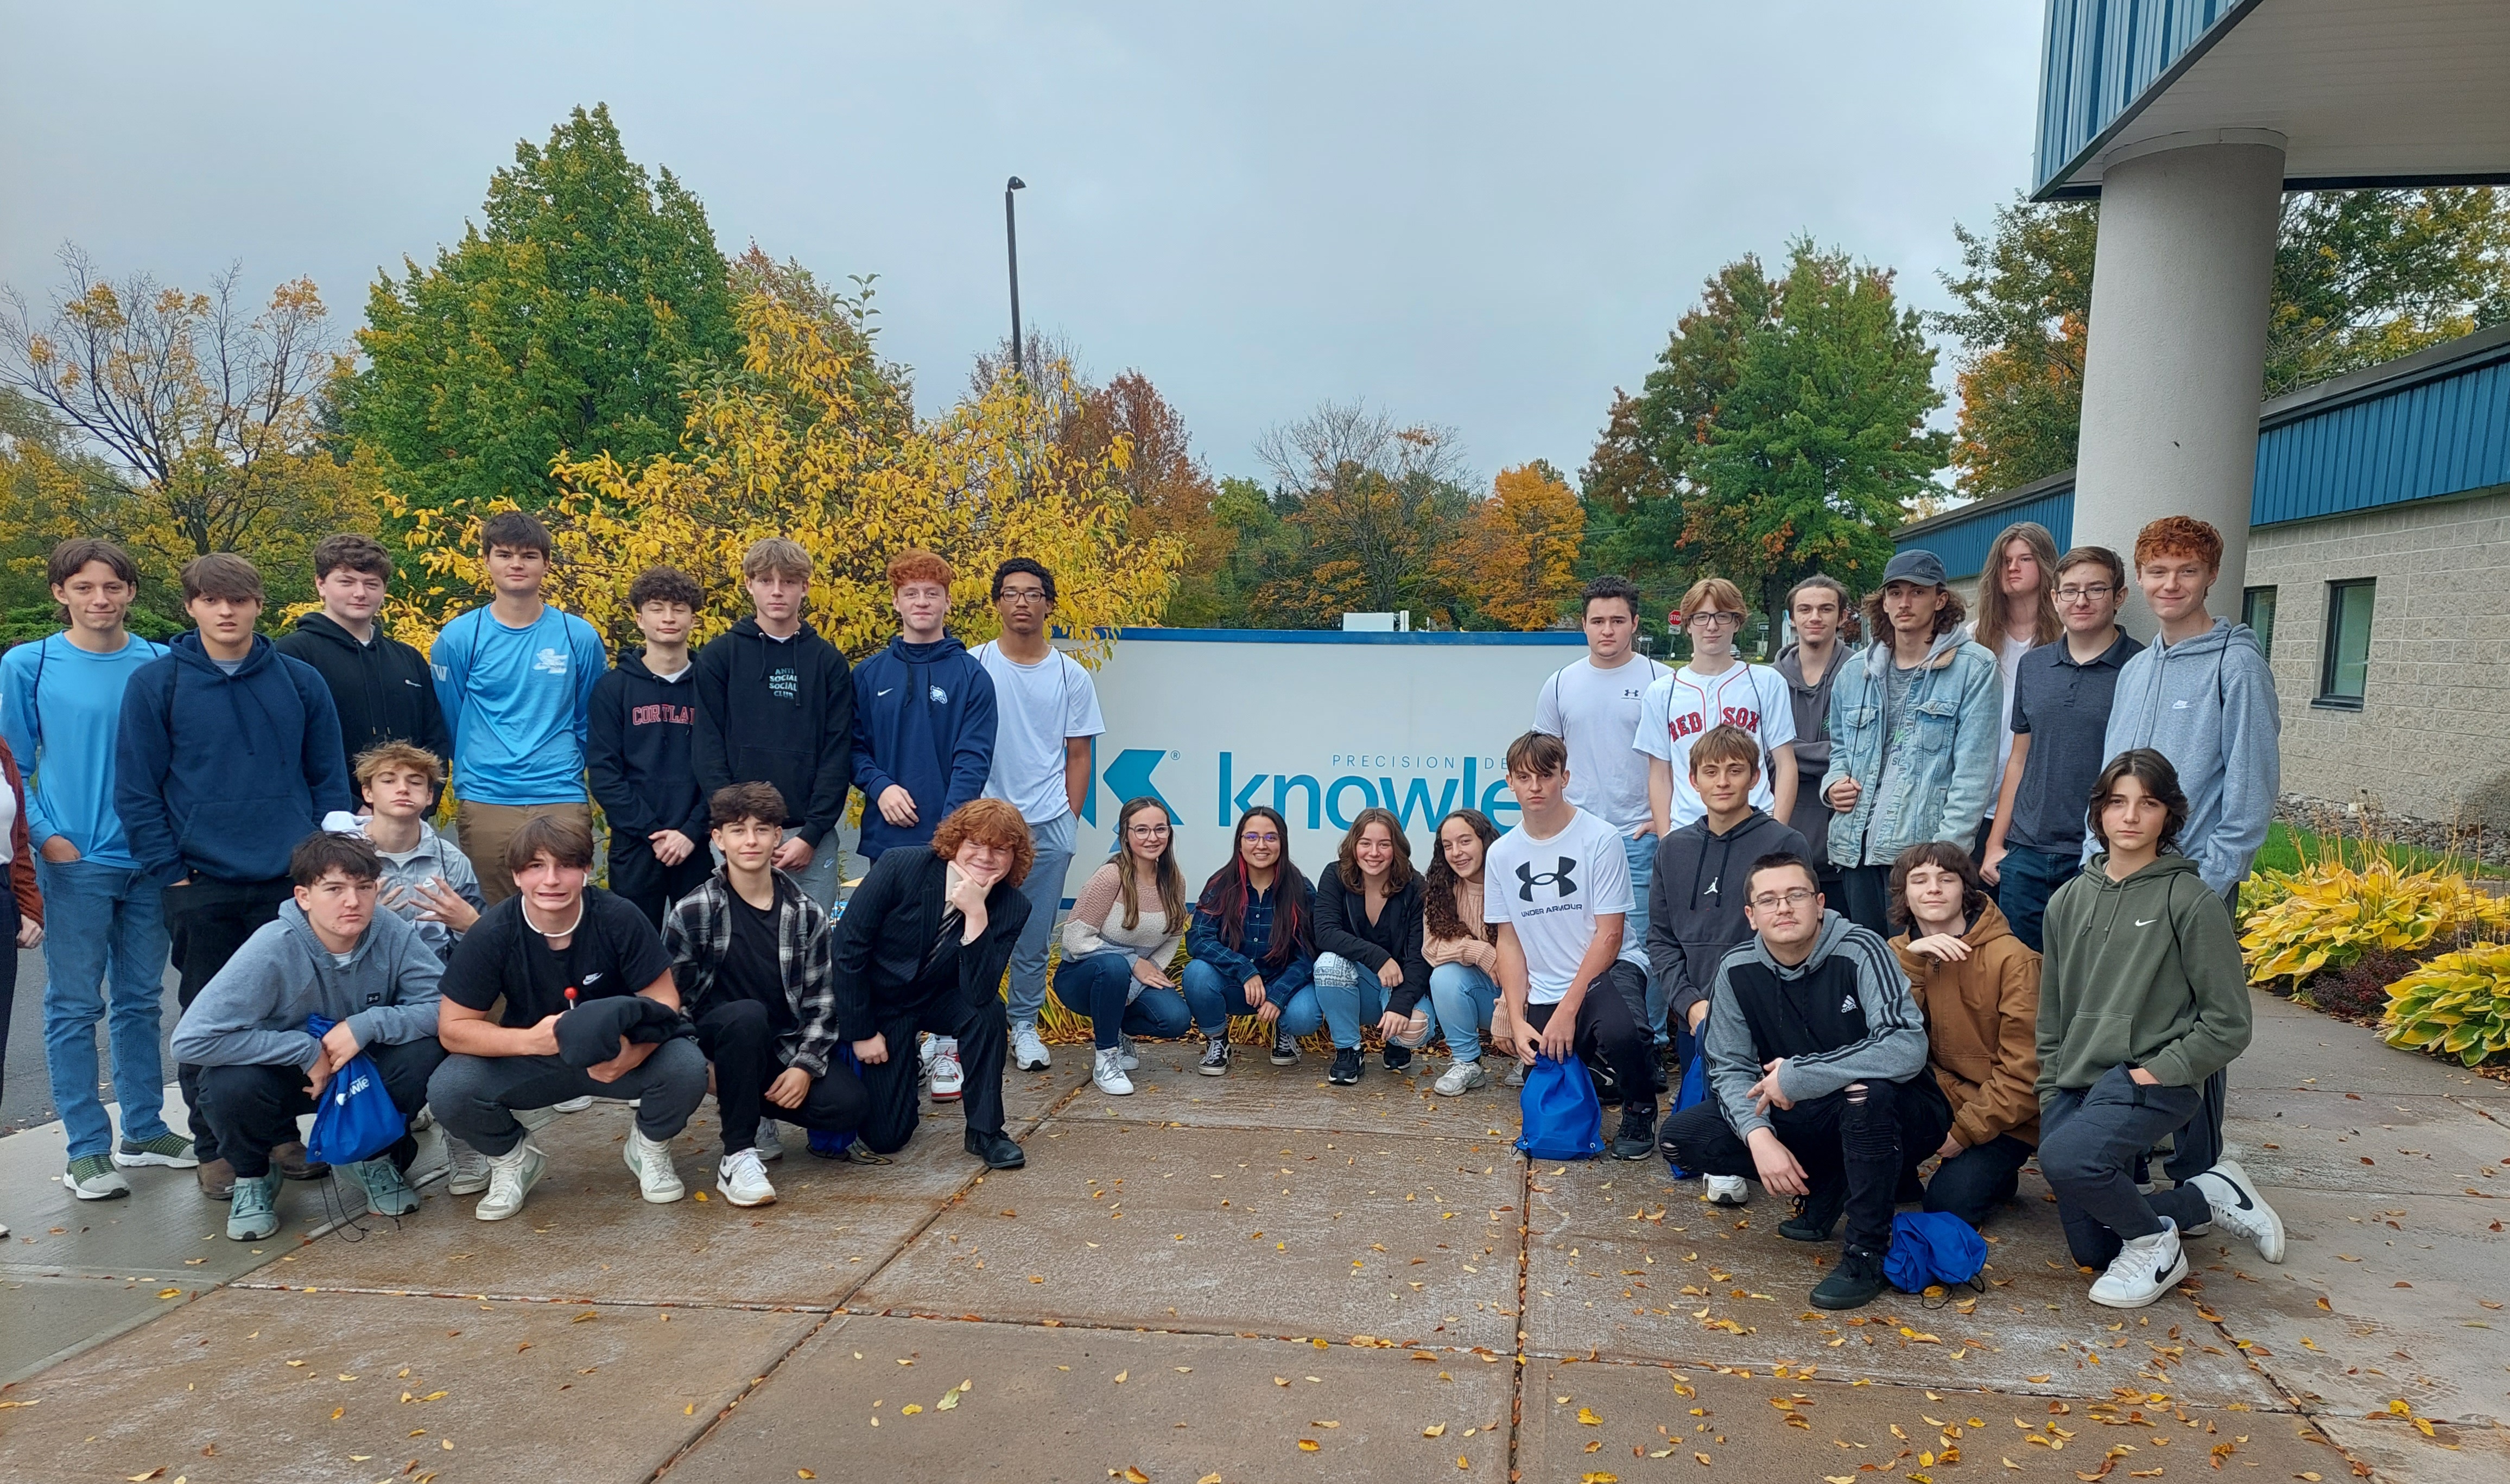 JEHS students post in front of Knowles Precision Devices in Cazenovia during an October field trip